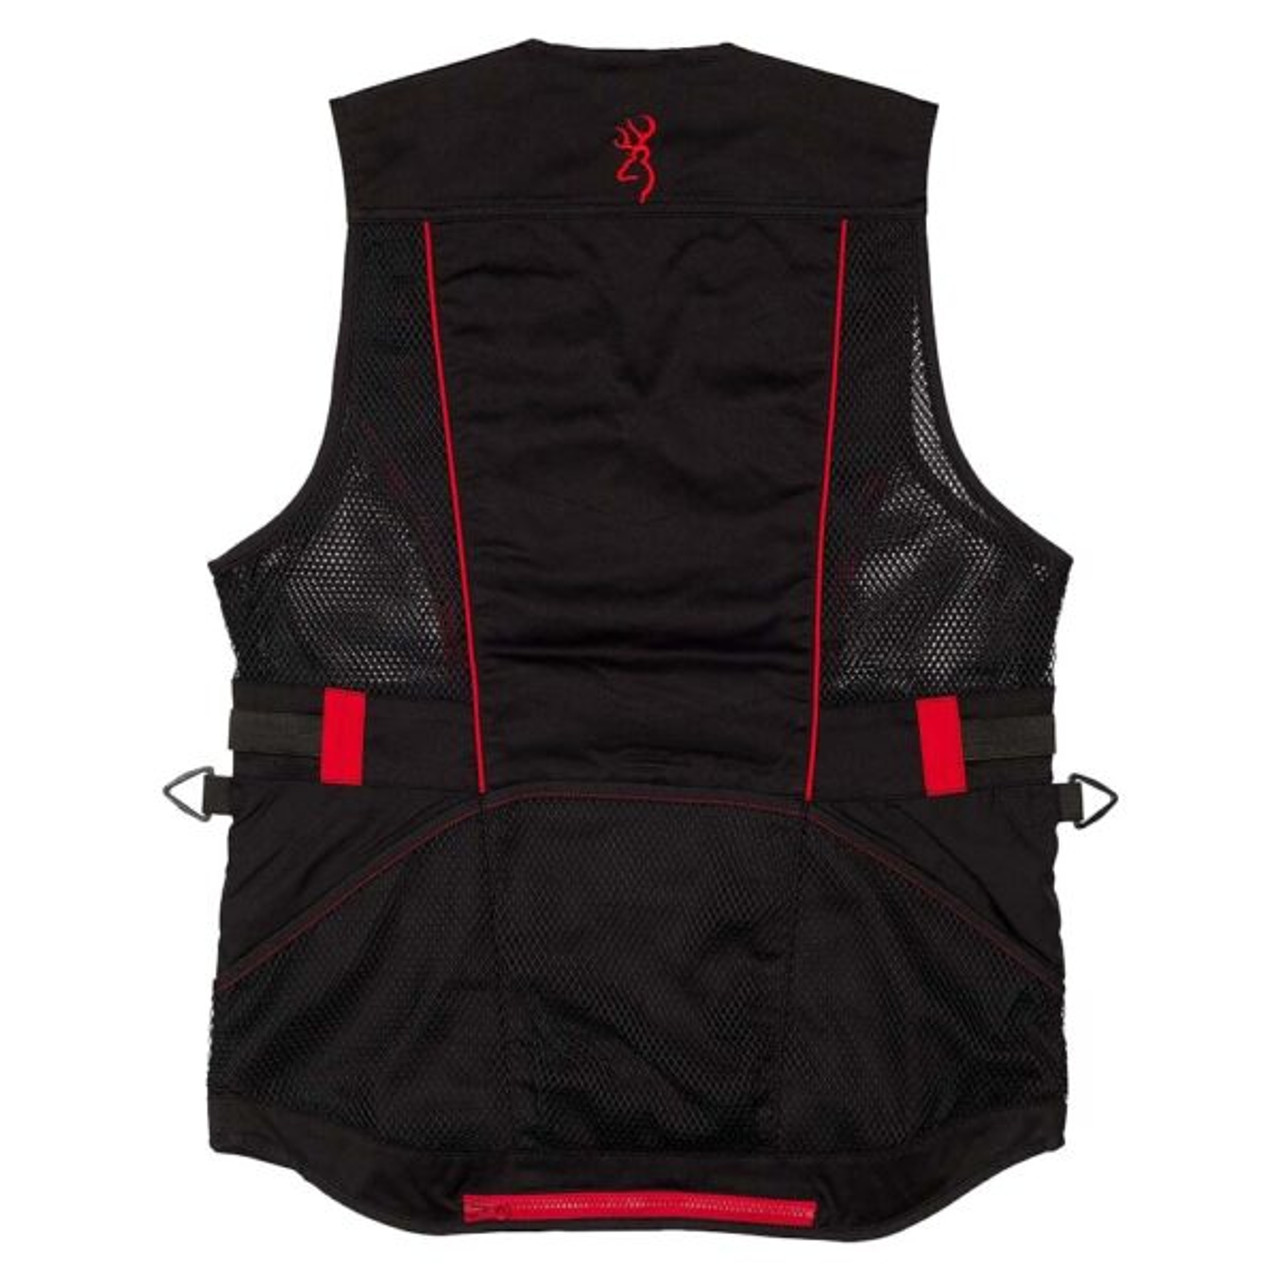 Browning Women’s Ace Shooting Vest-Black/Red- Back